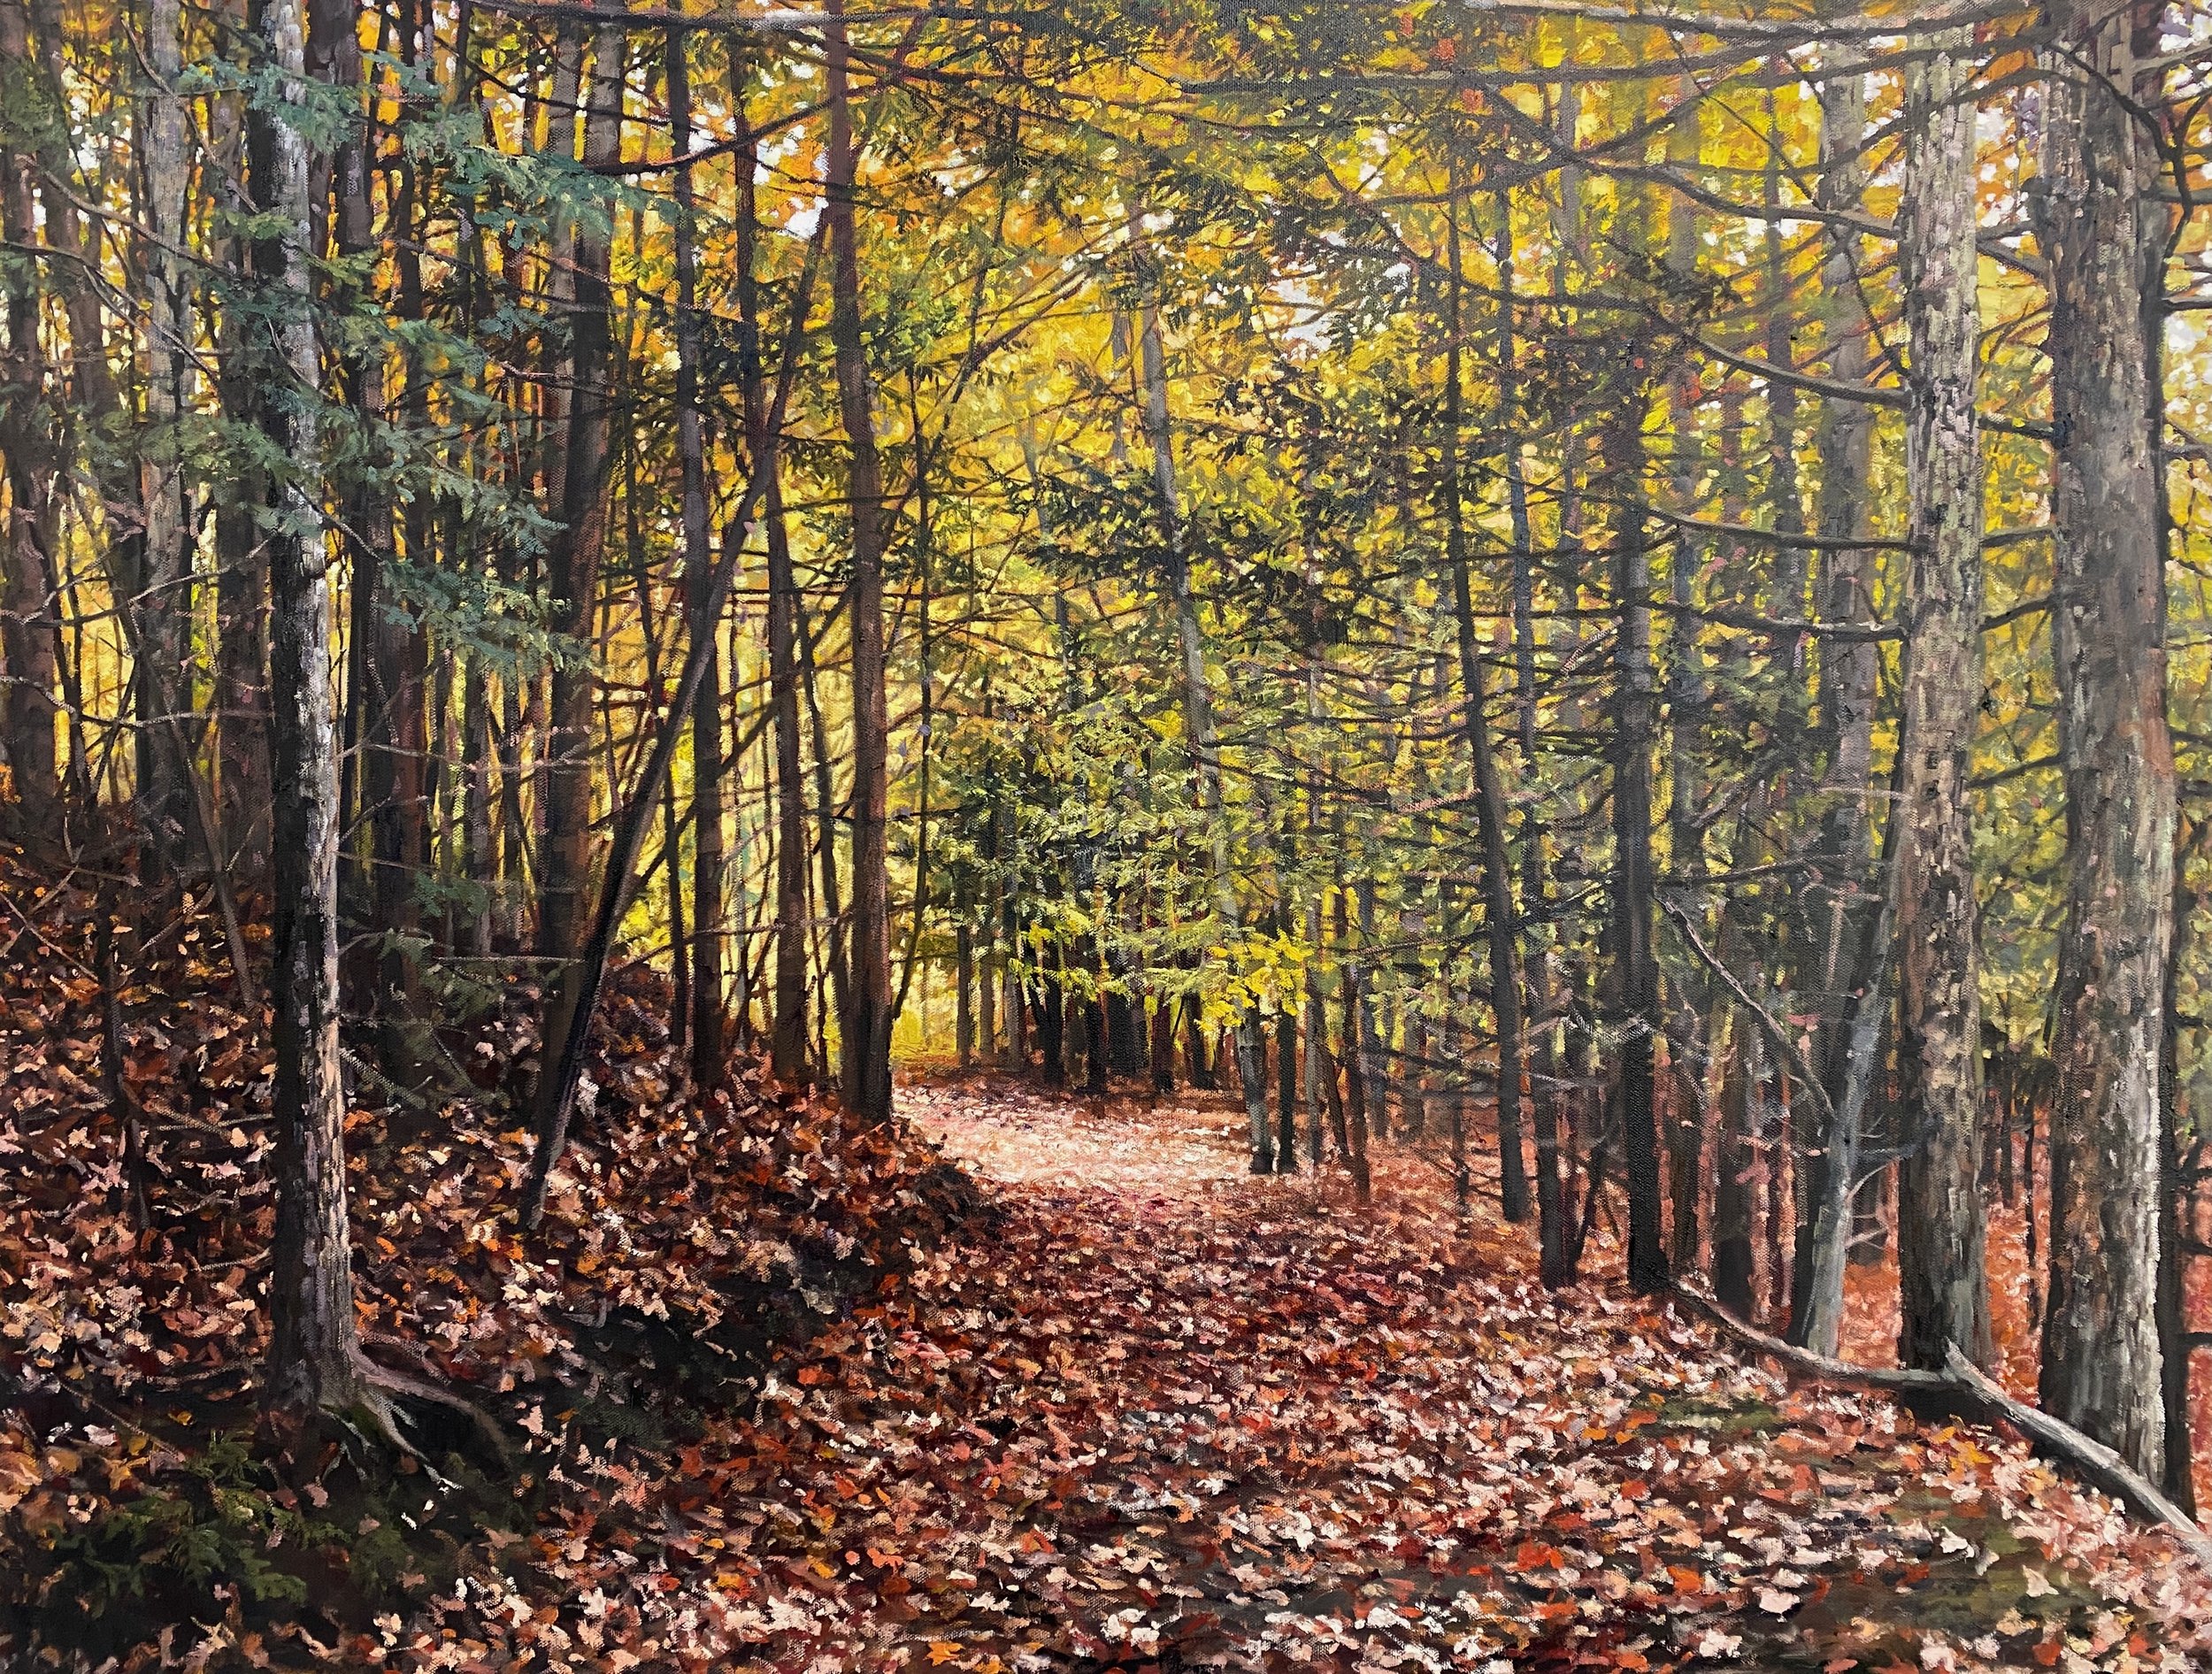 $1800 - In the Forest, 2024, 30" x 40", oil on canvas